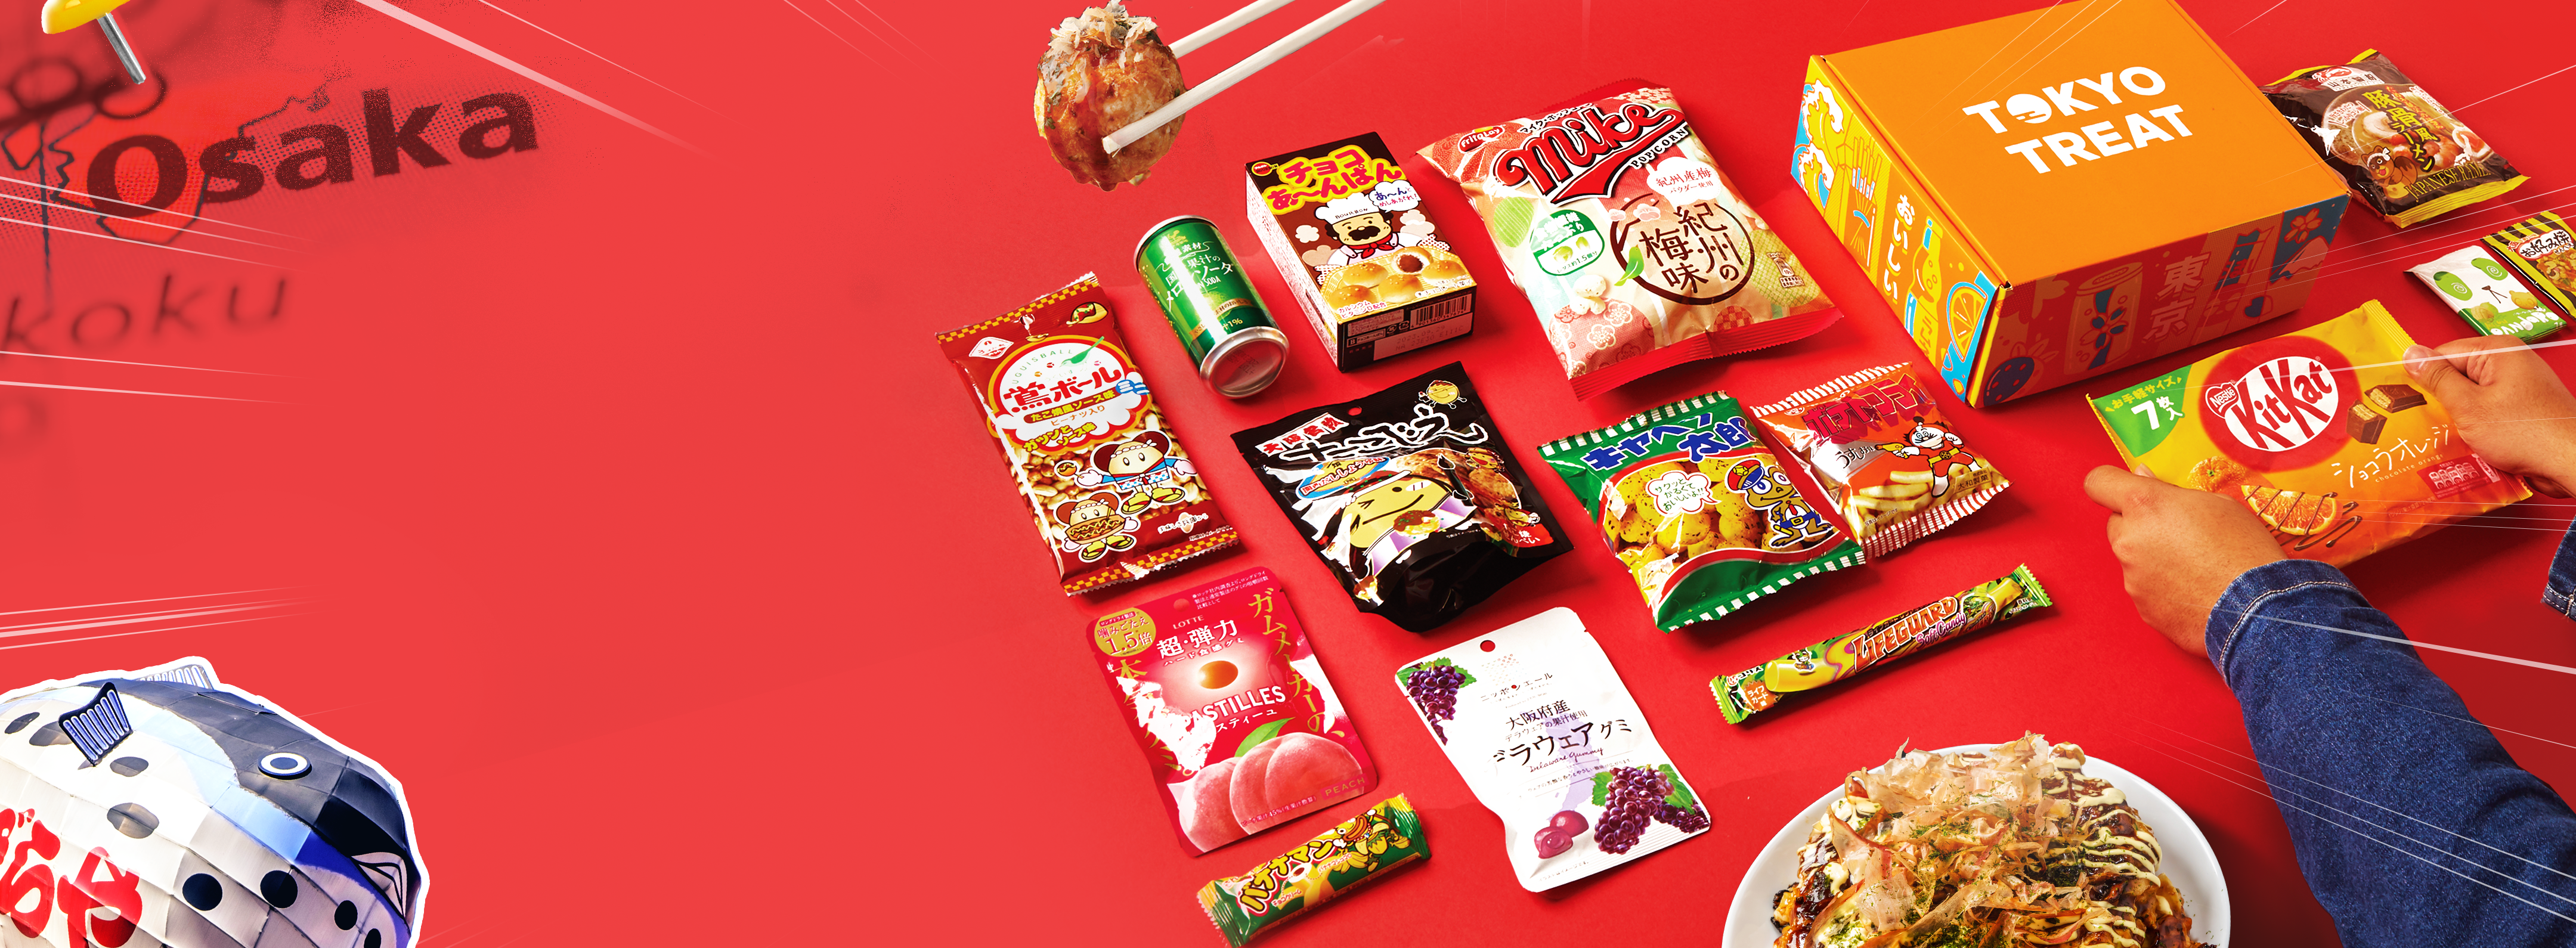 TokyoTreat box sits on a red background, surrounded by box items.